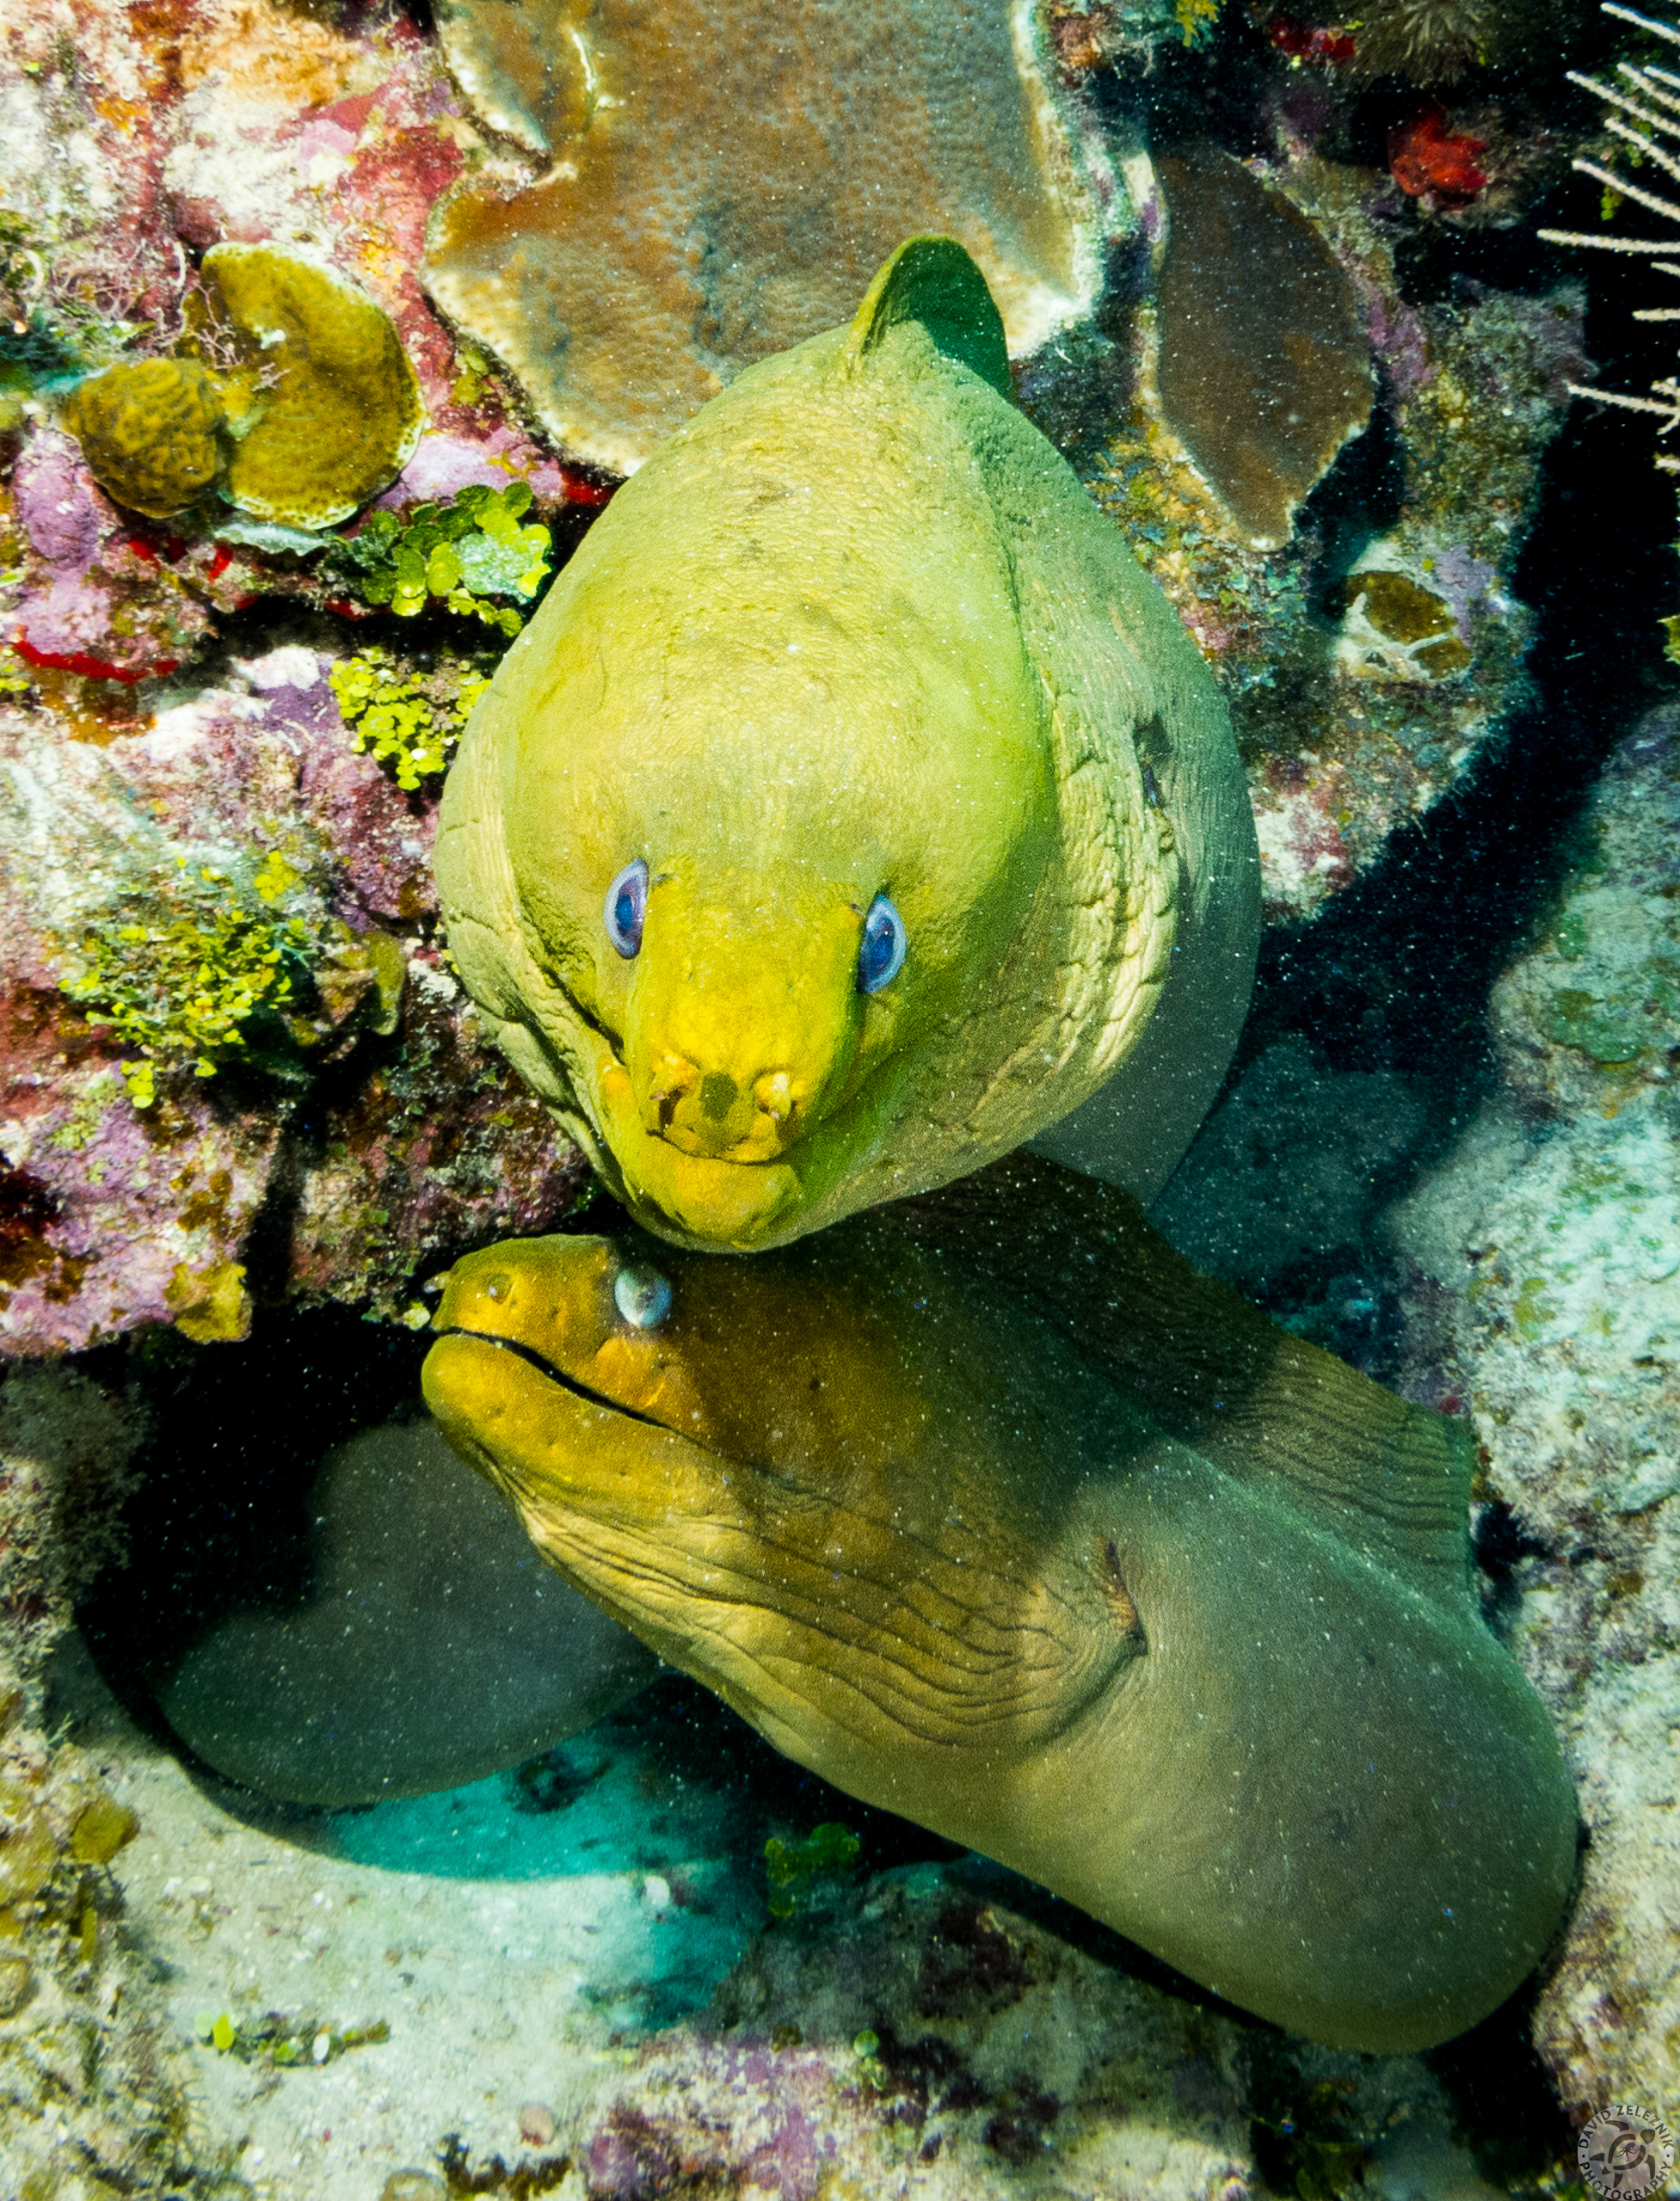 Two for One - as one Giant Green Moray came out to inspect his reflection in my port, the other eel came out of the same hole to see what was going on